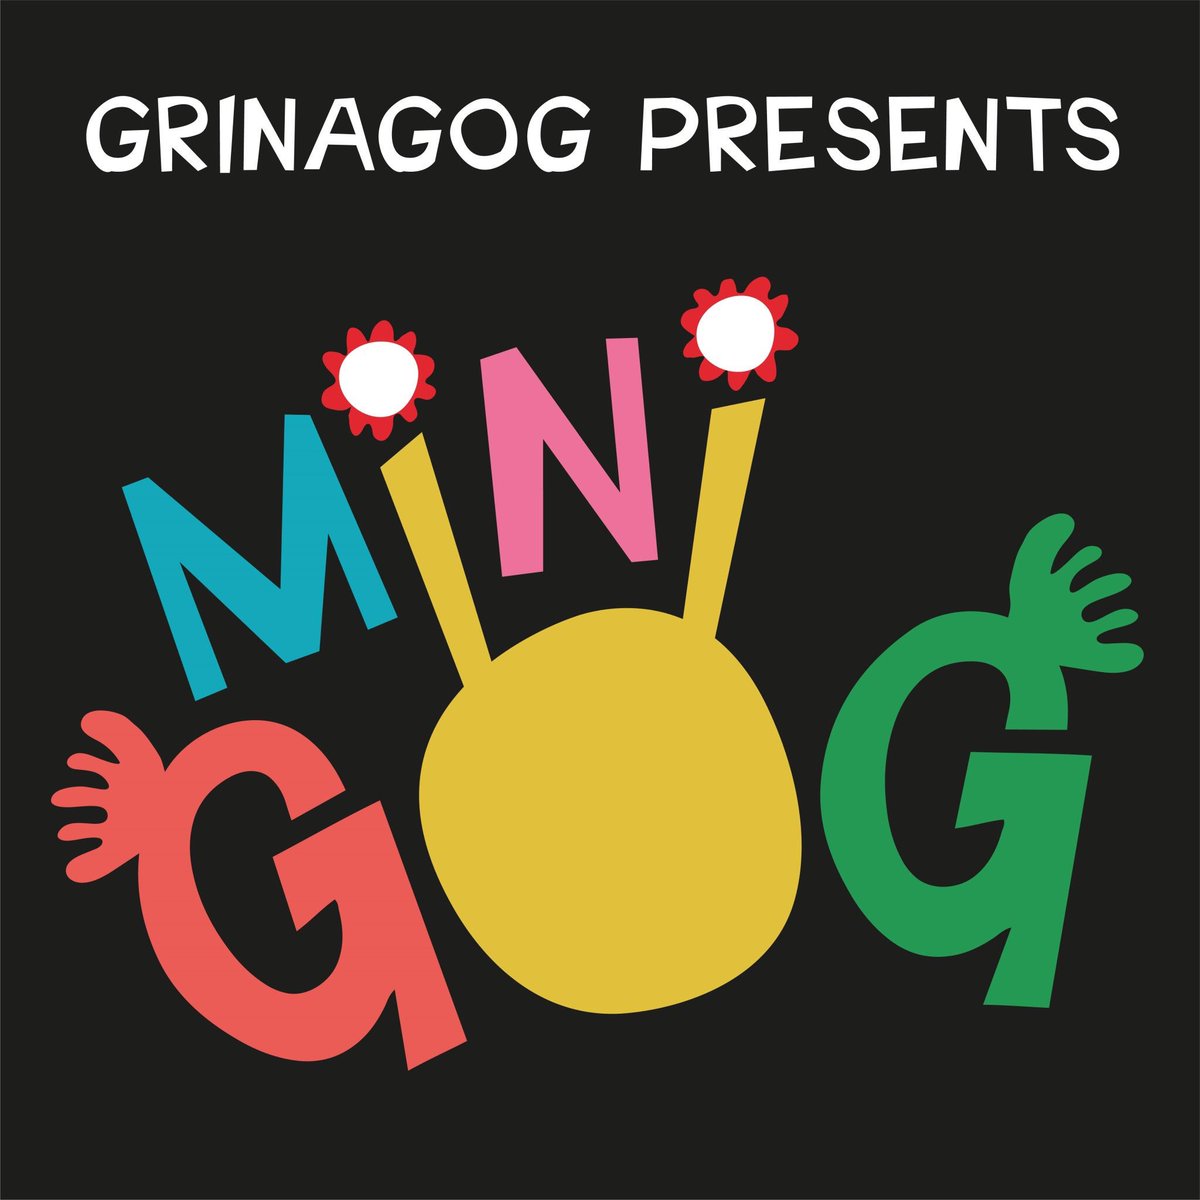 We are SOOOOOOO... looking forward to being part of MINI GOG!! 

See us there SATURDAY 13th APRIL for making and shape throwing FUN TIMES! 

🕺🏻🎵🎶🎨💃🤹🏻‍♂️🎪=BOOM!